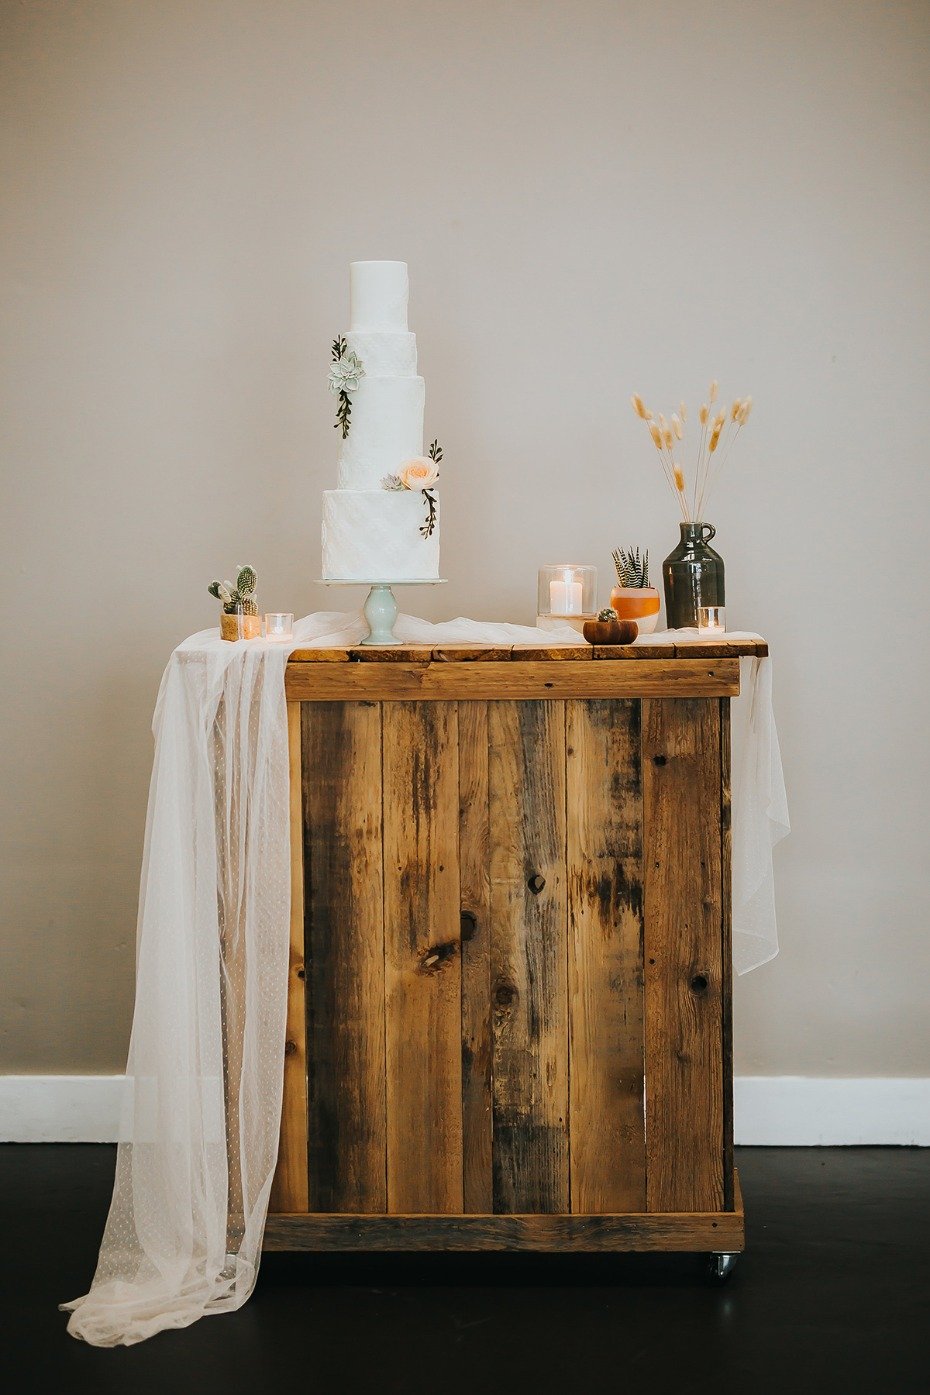 Rustic cake stand with potted cacti